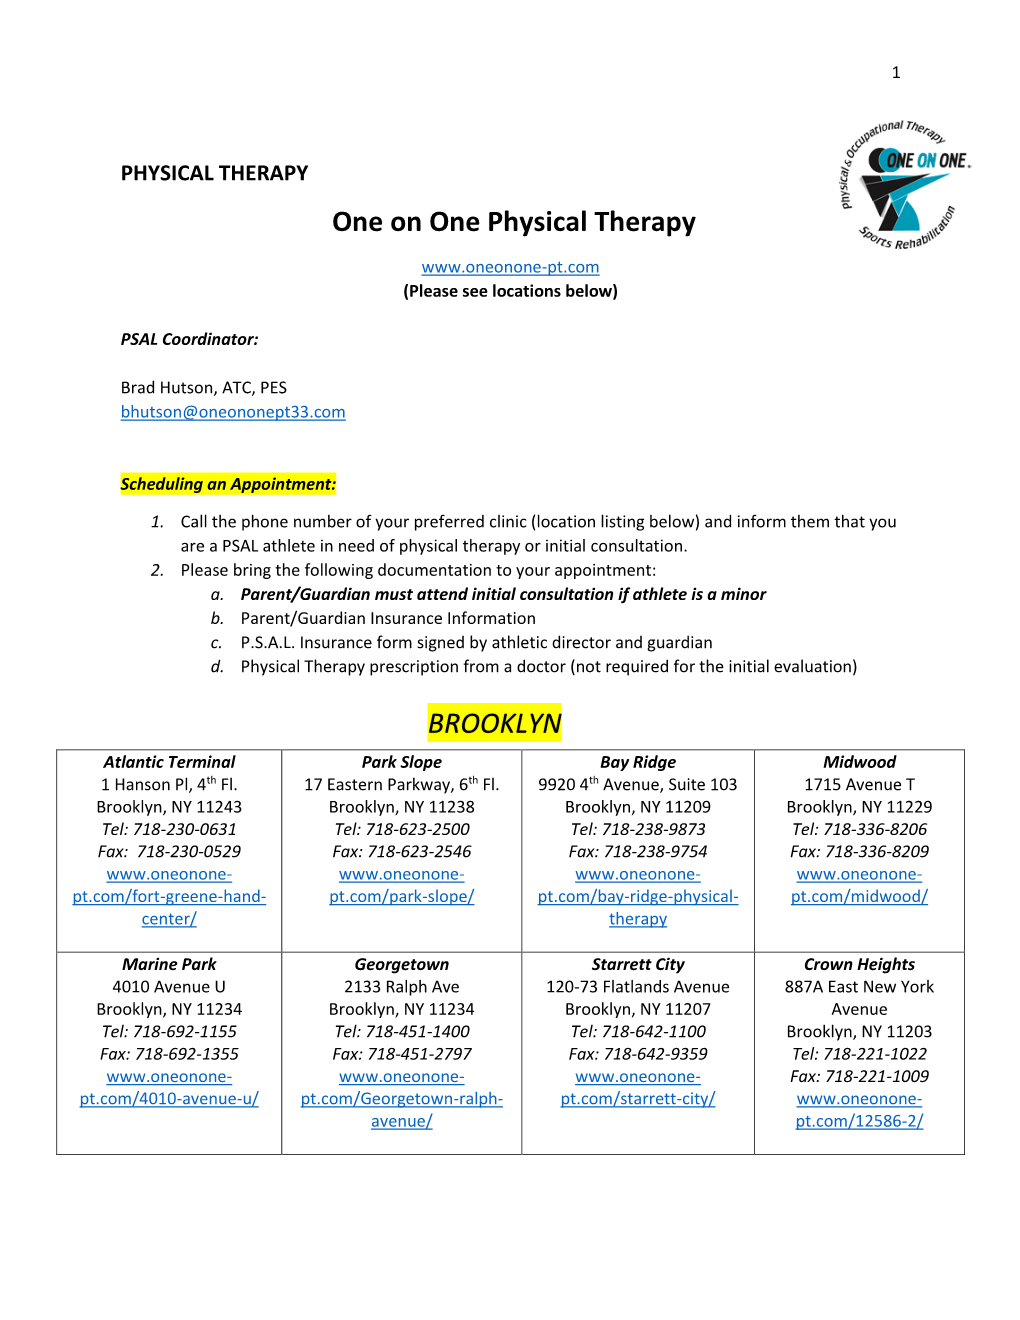 One on One Physical Therapy BROOKLYN